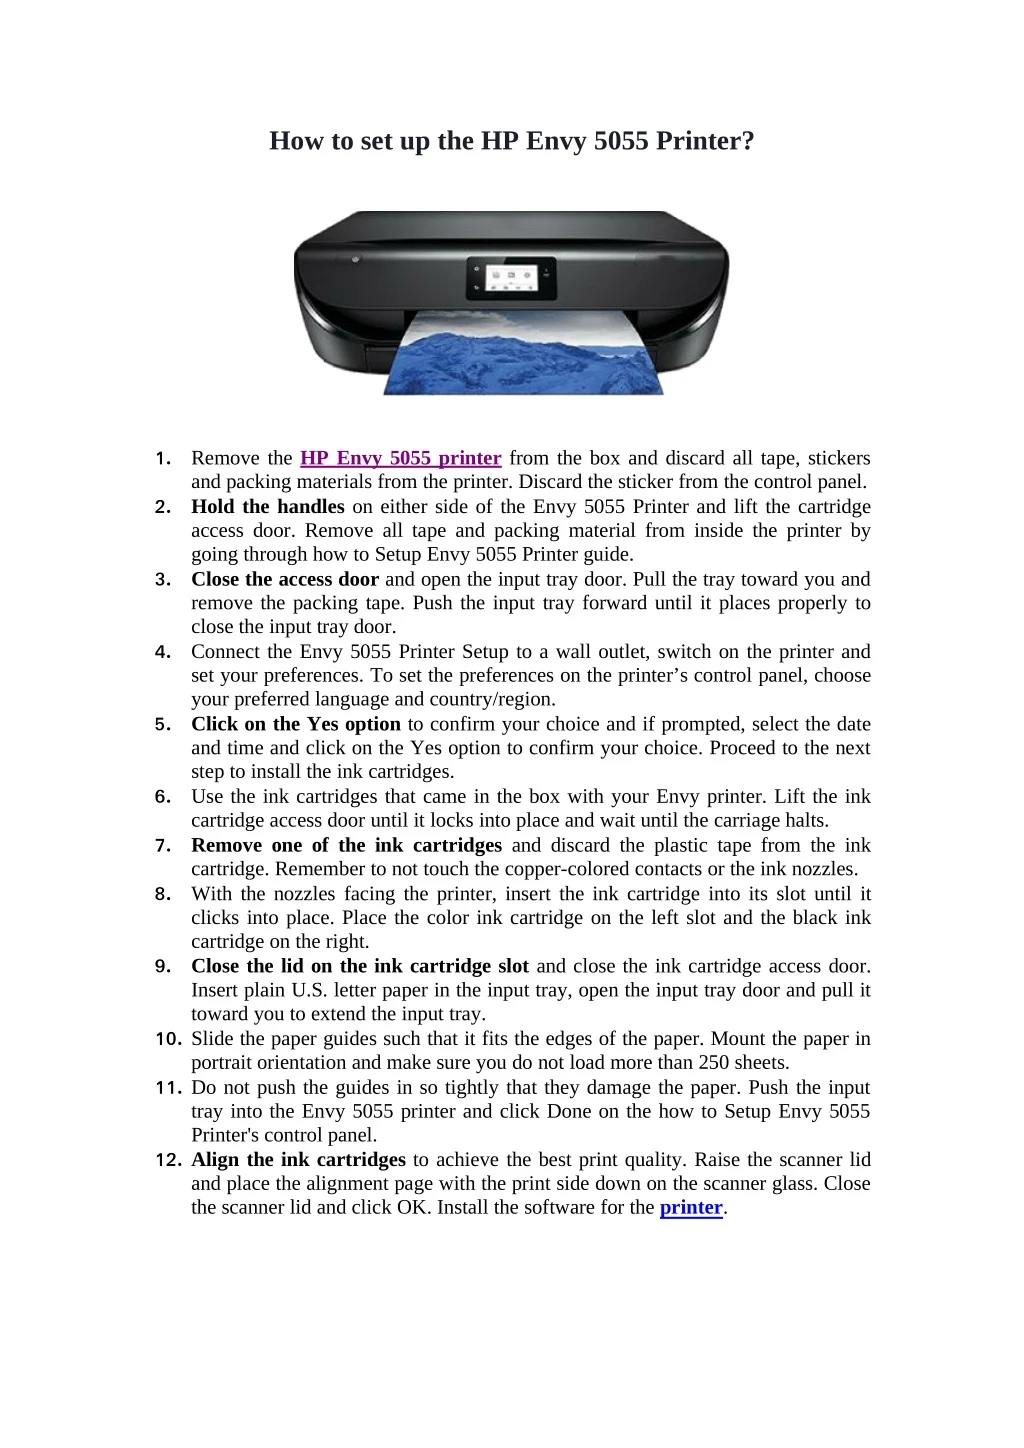 how to set up the hp envy 5055 printer